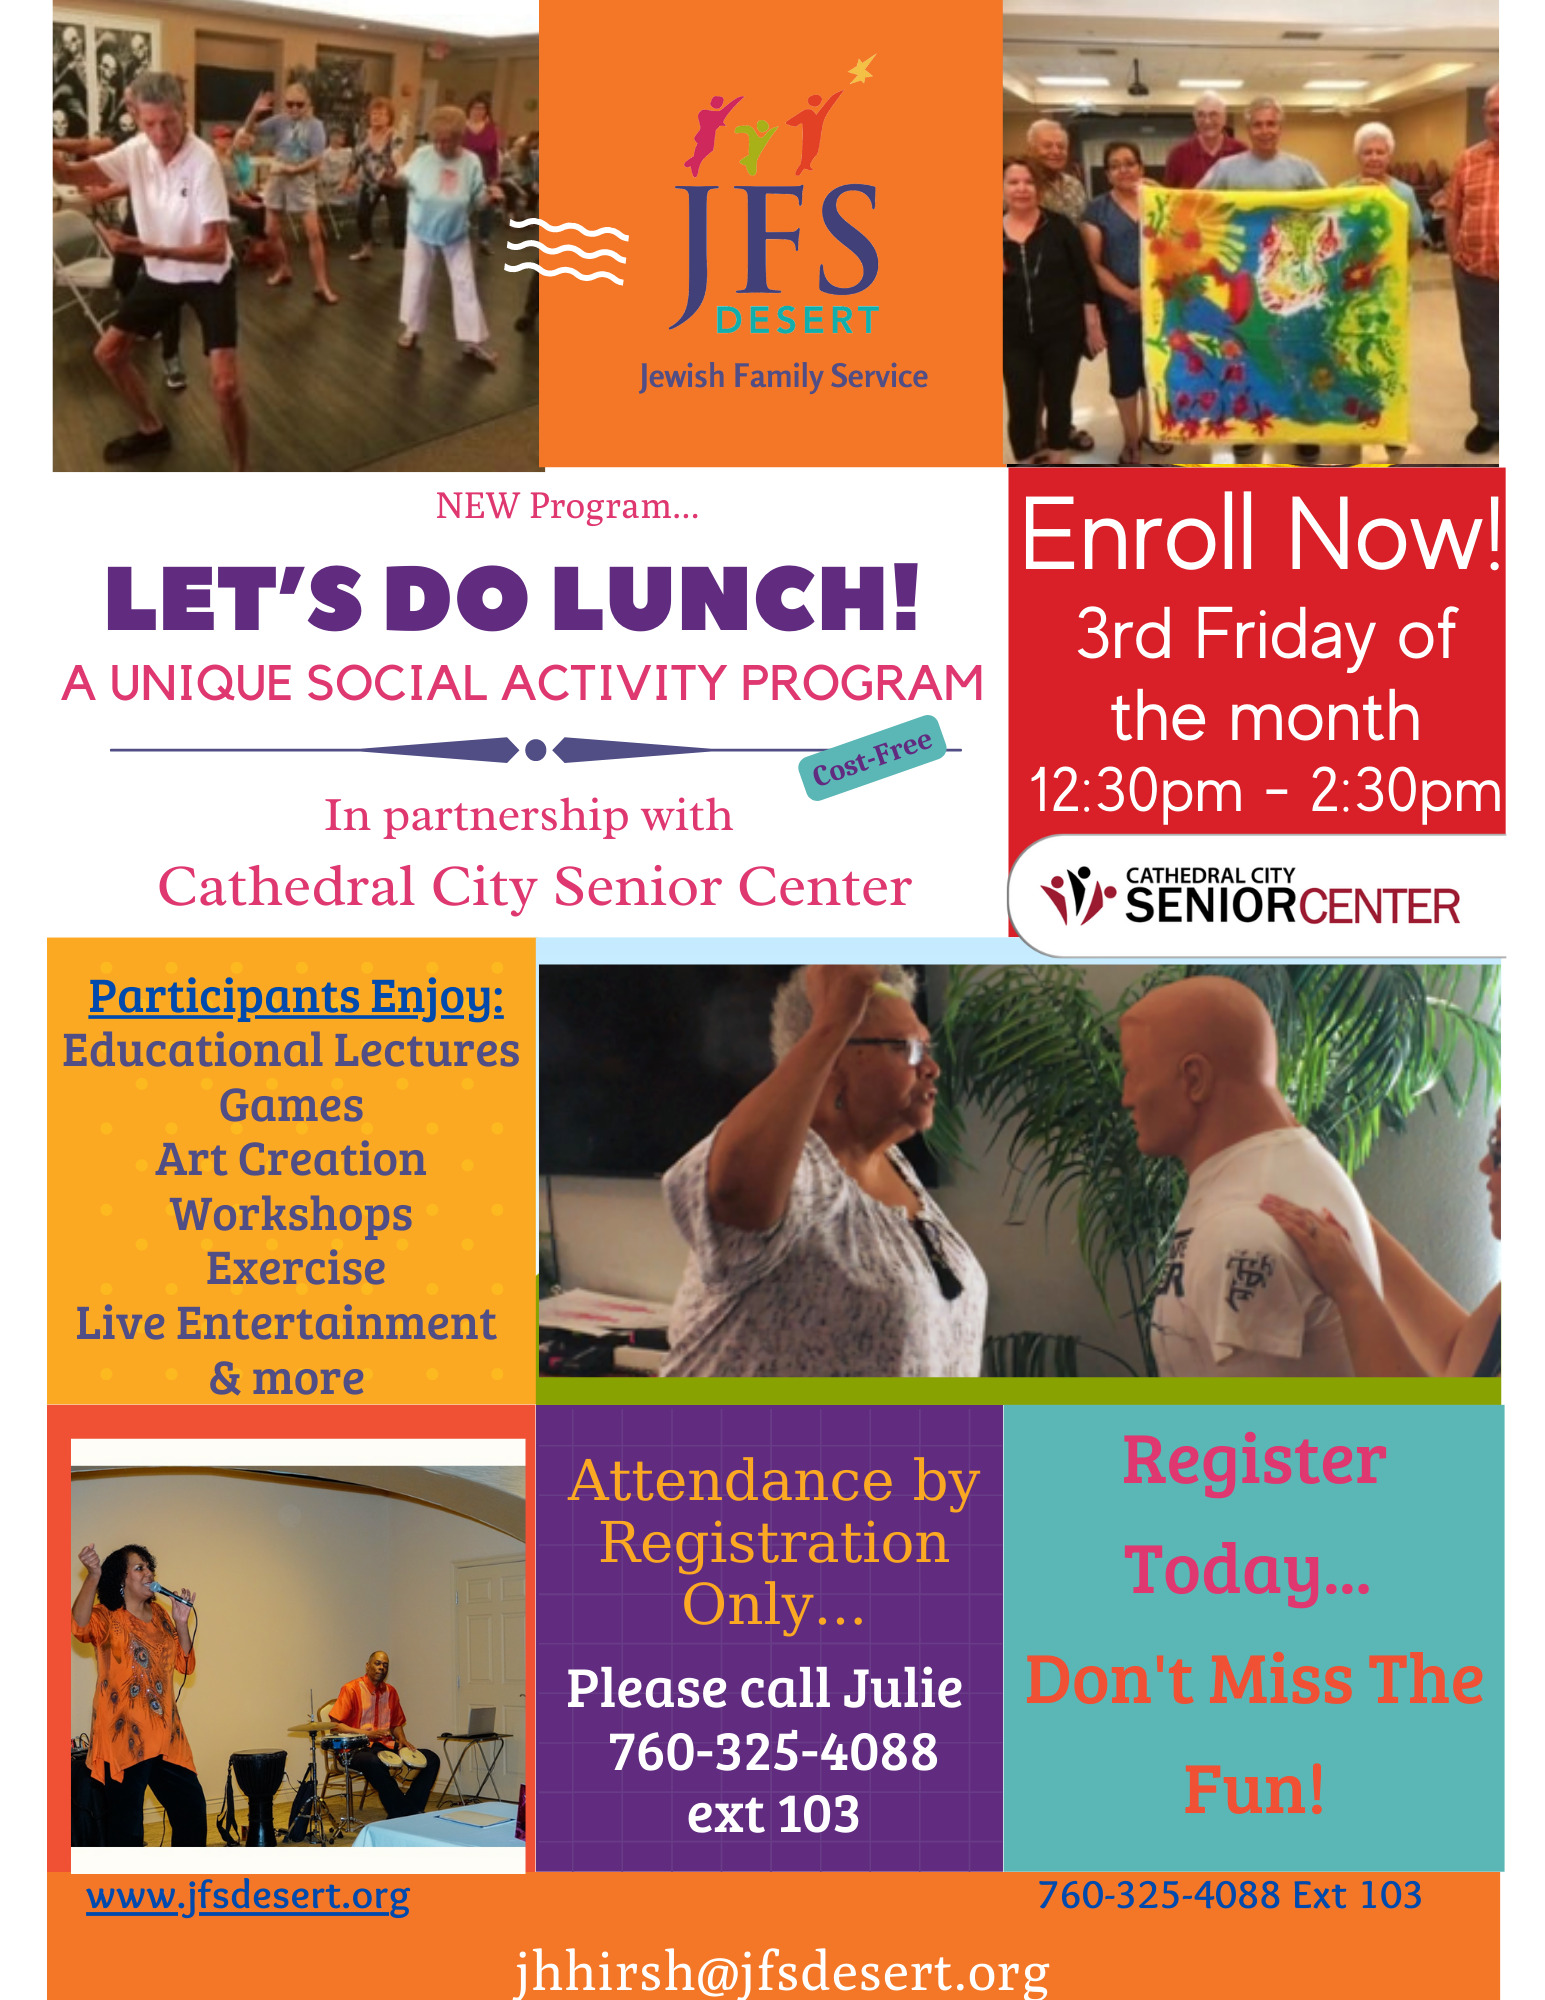 Let's do Lunch flyer